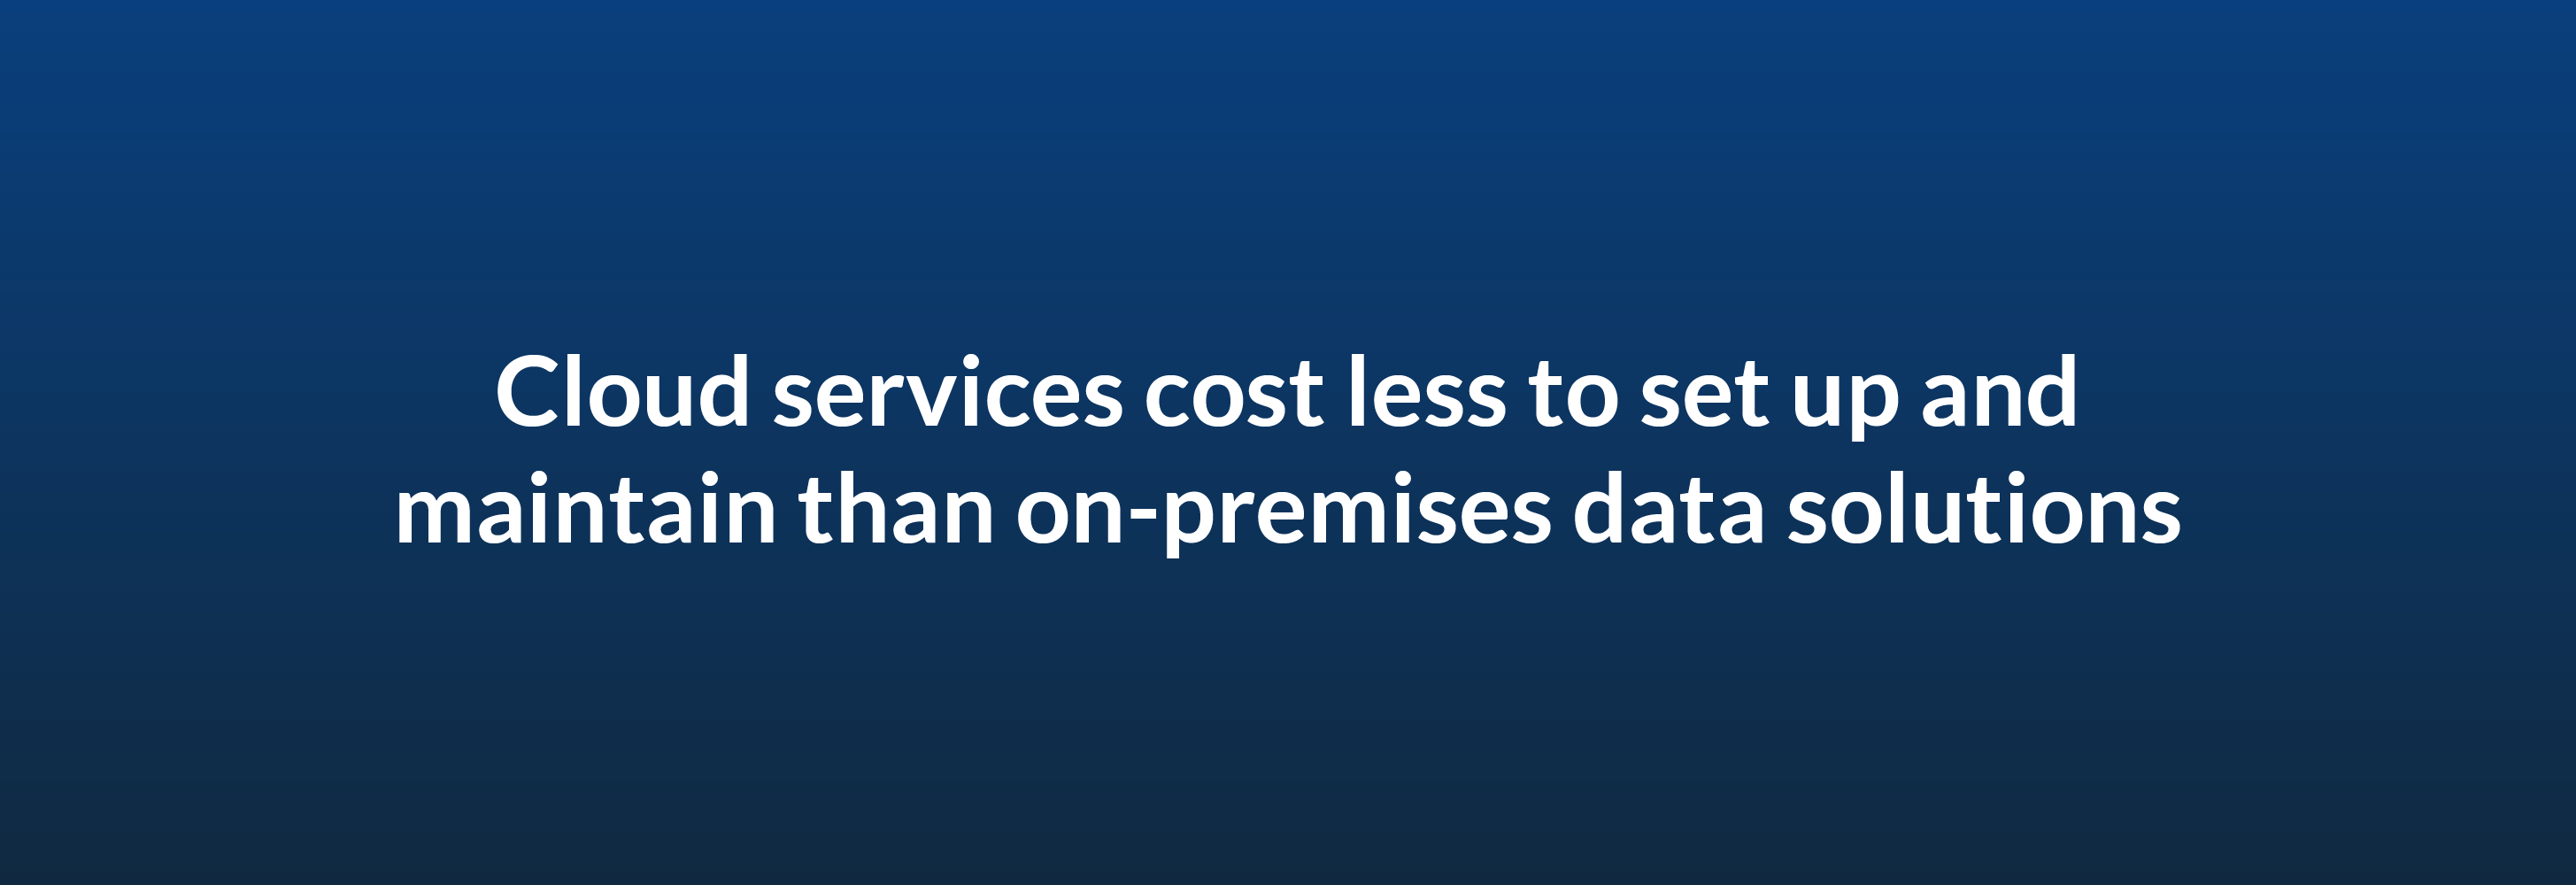 Cloud services cost less to set up and maintain than on-premises data solutions